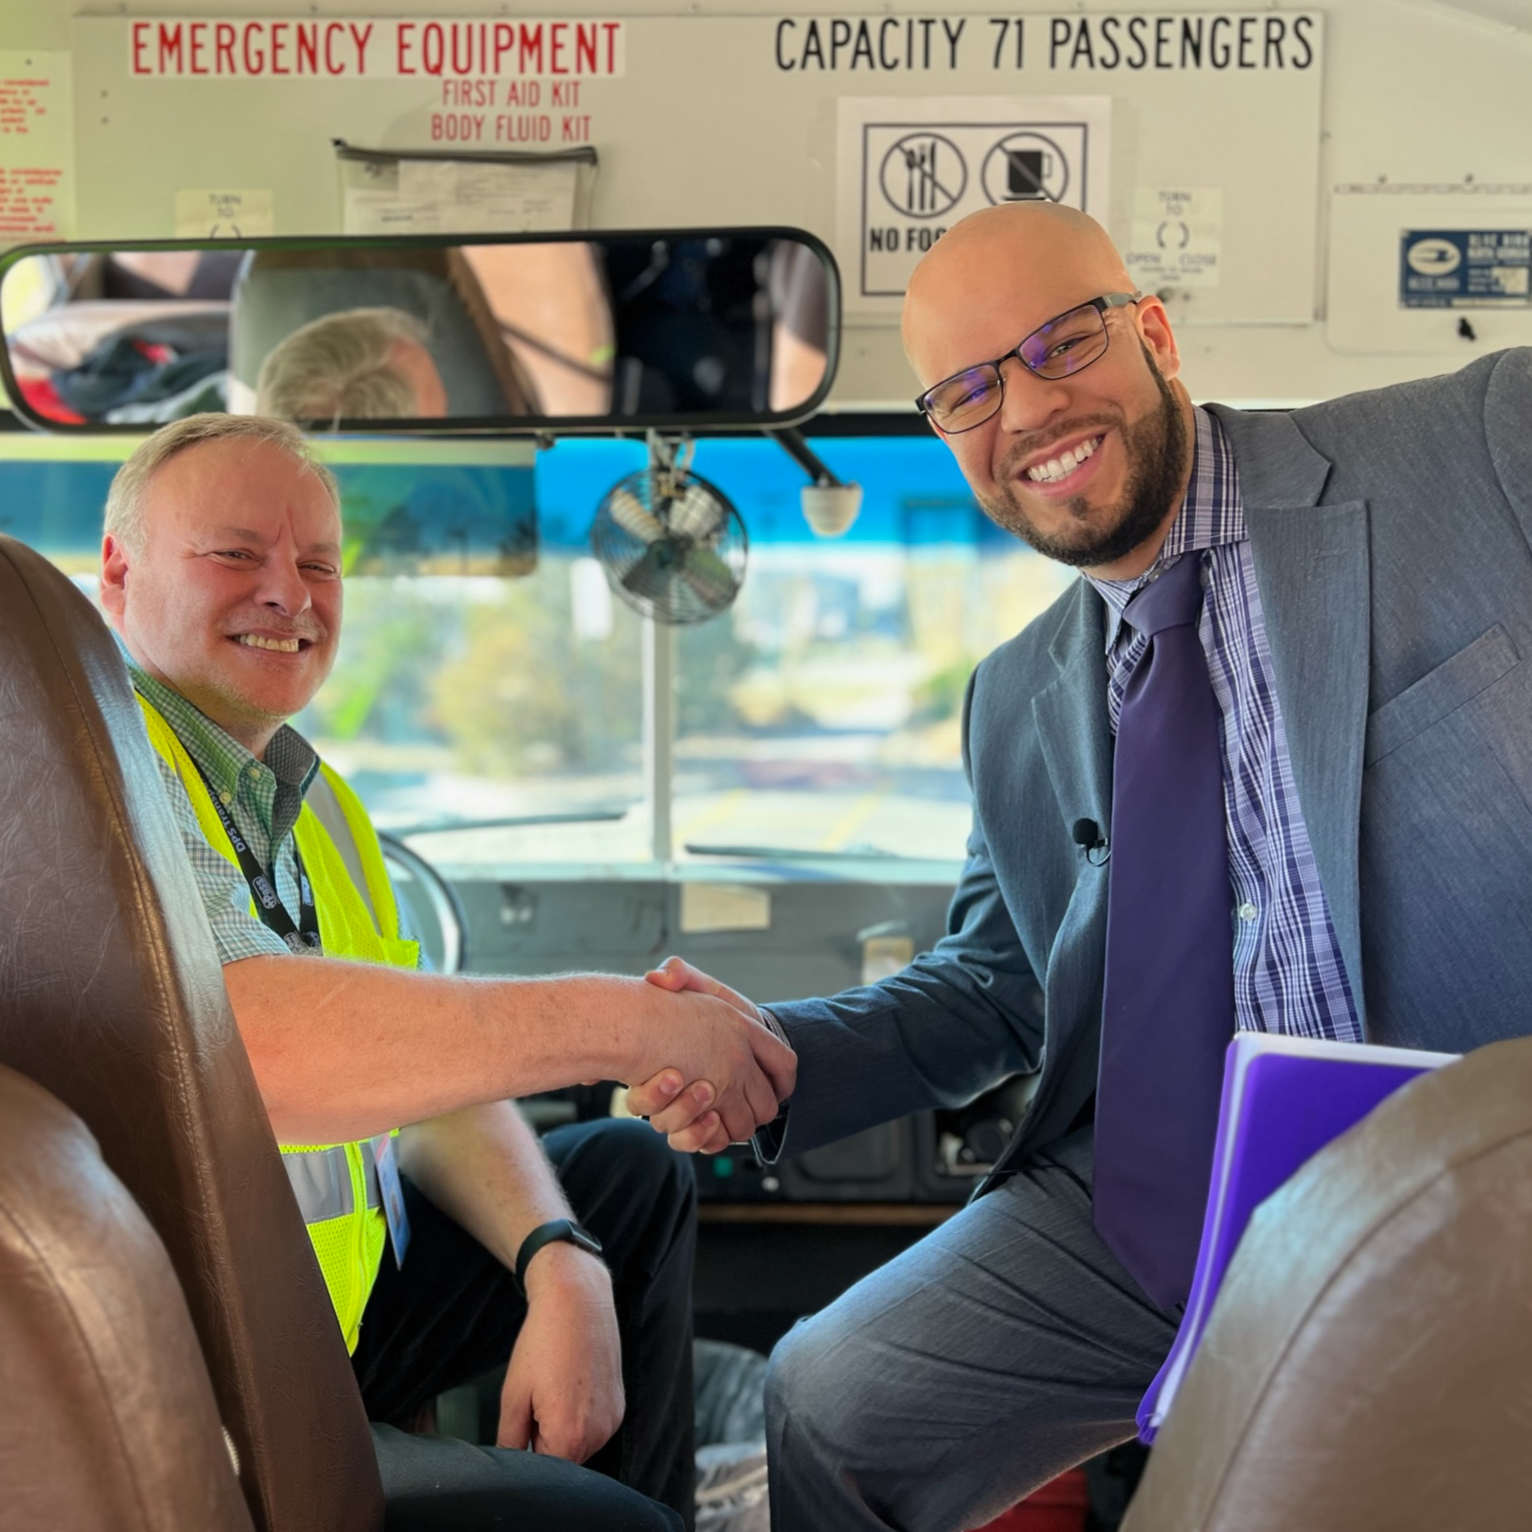 Dr. Marrero shaking hands with bus driver